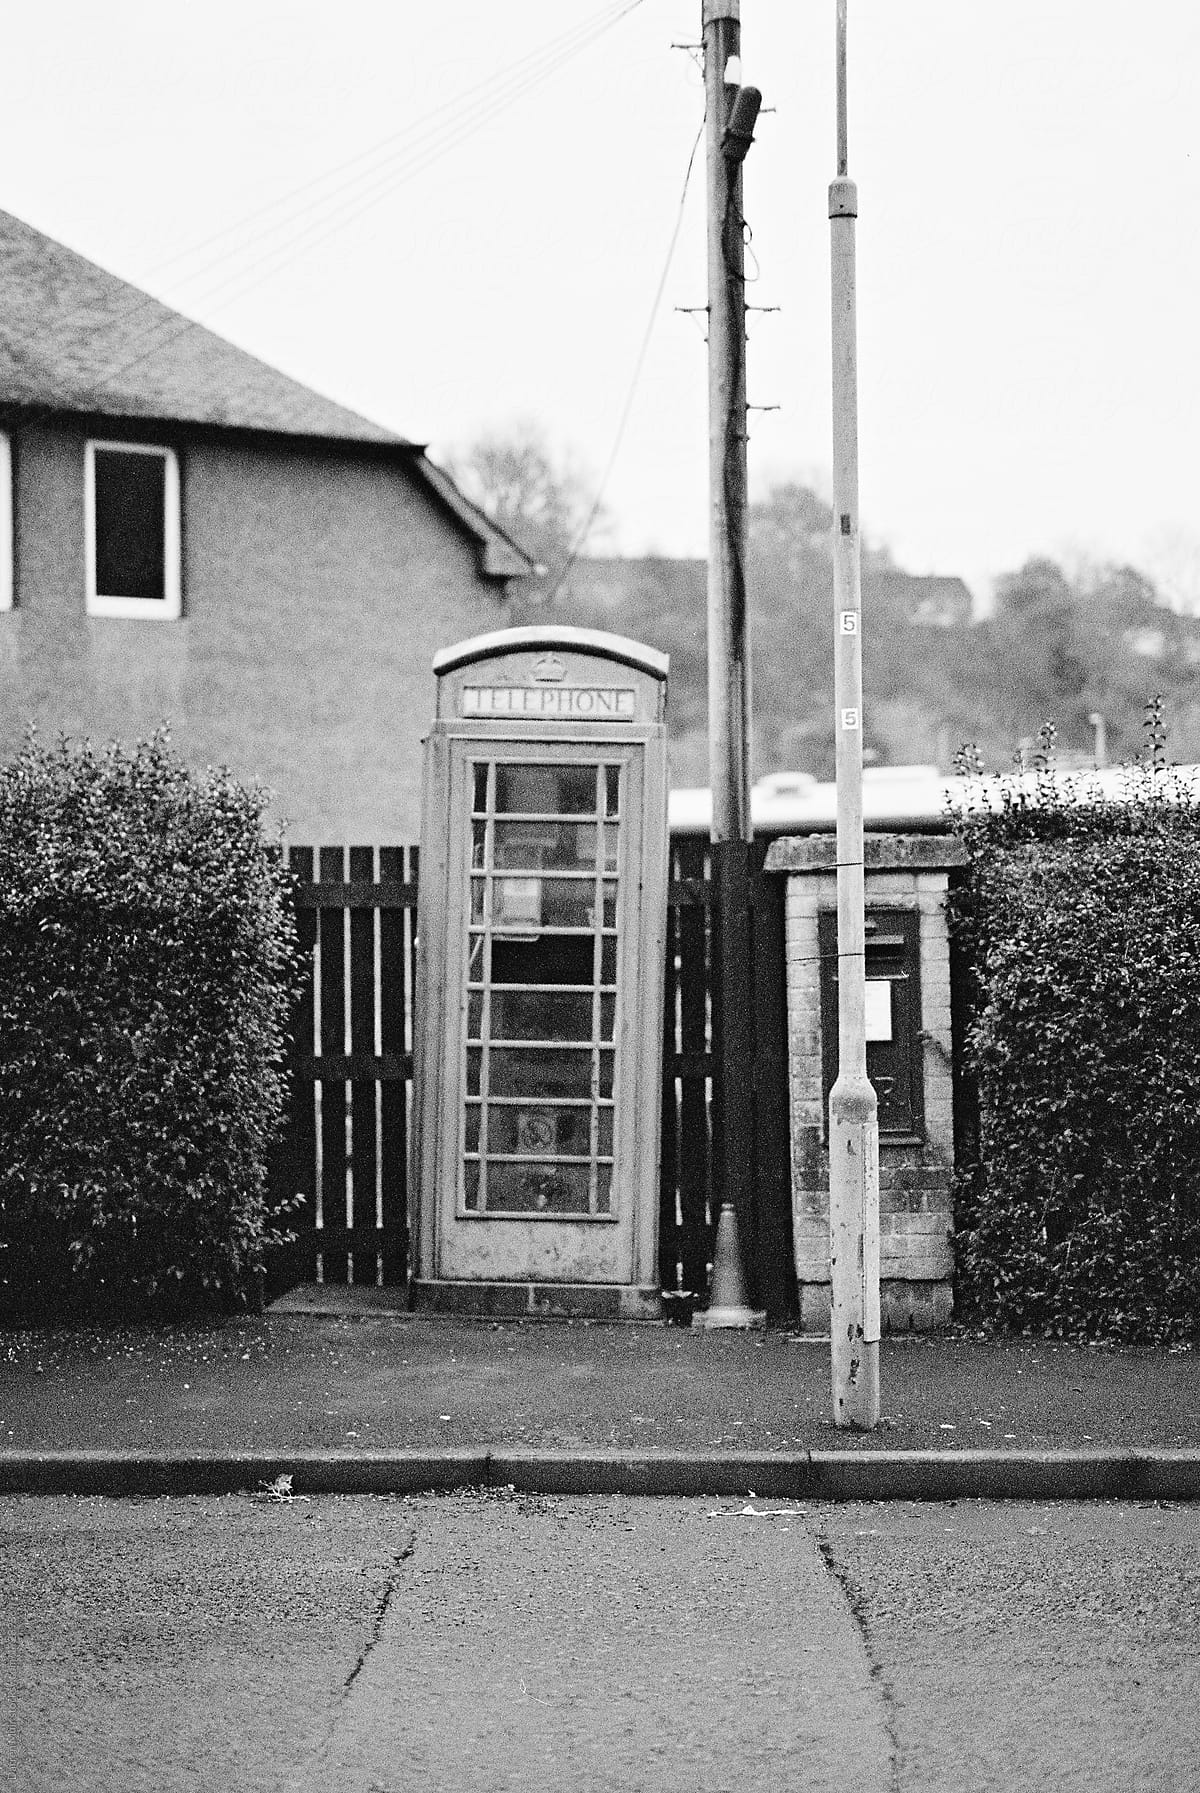 British style phone box in a residential street in the UK.